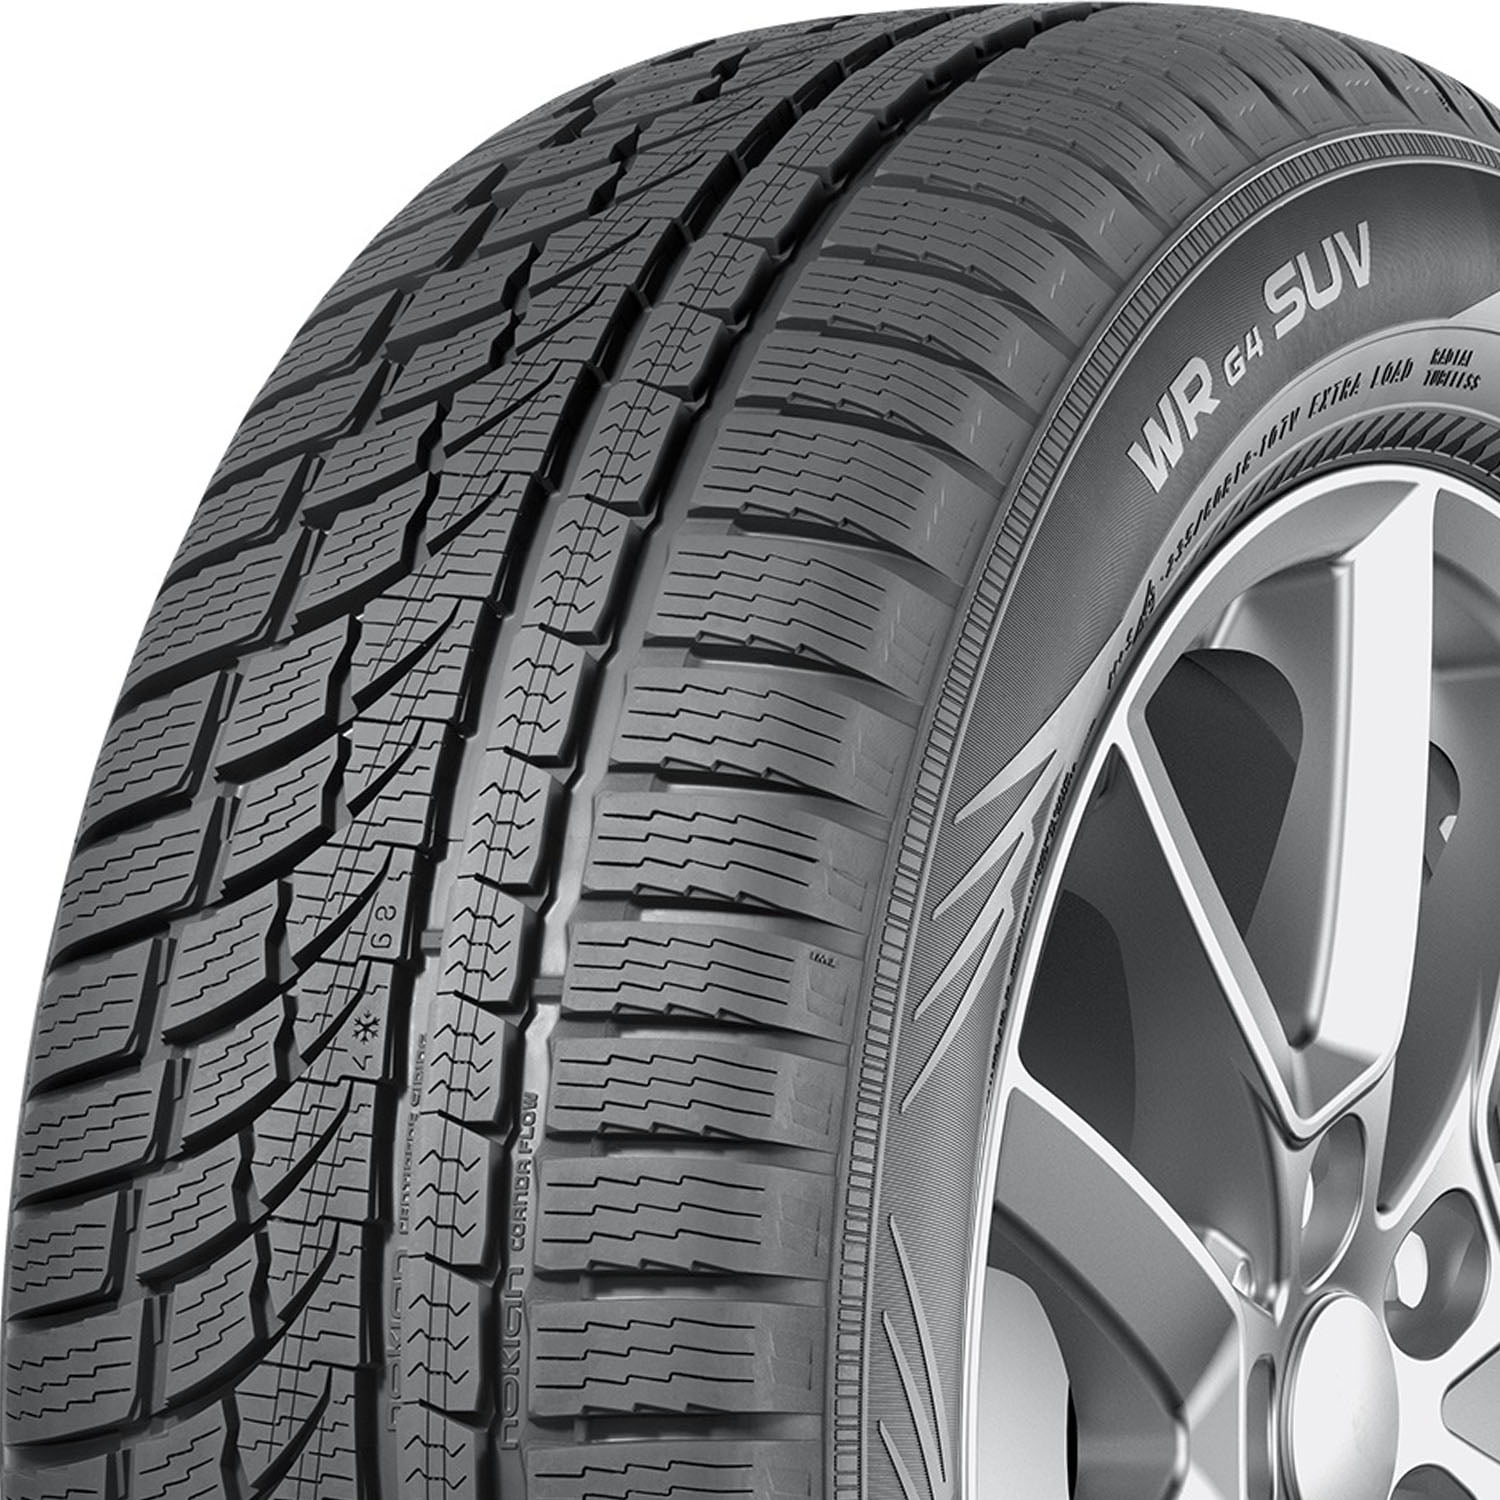 All 235/65R18 Tire WR SUV/Crossover SUV Nokian Weather 106V G4